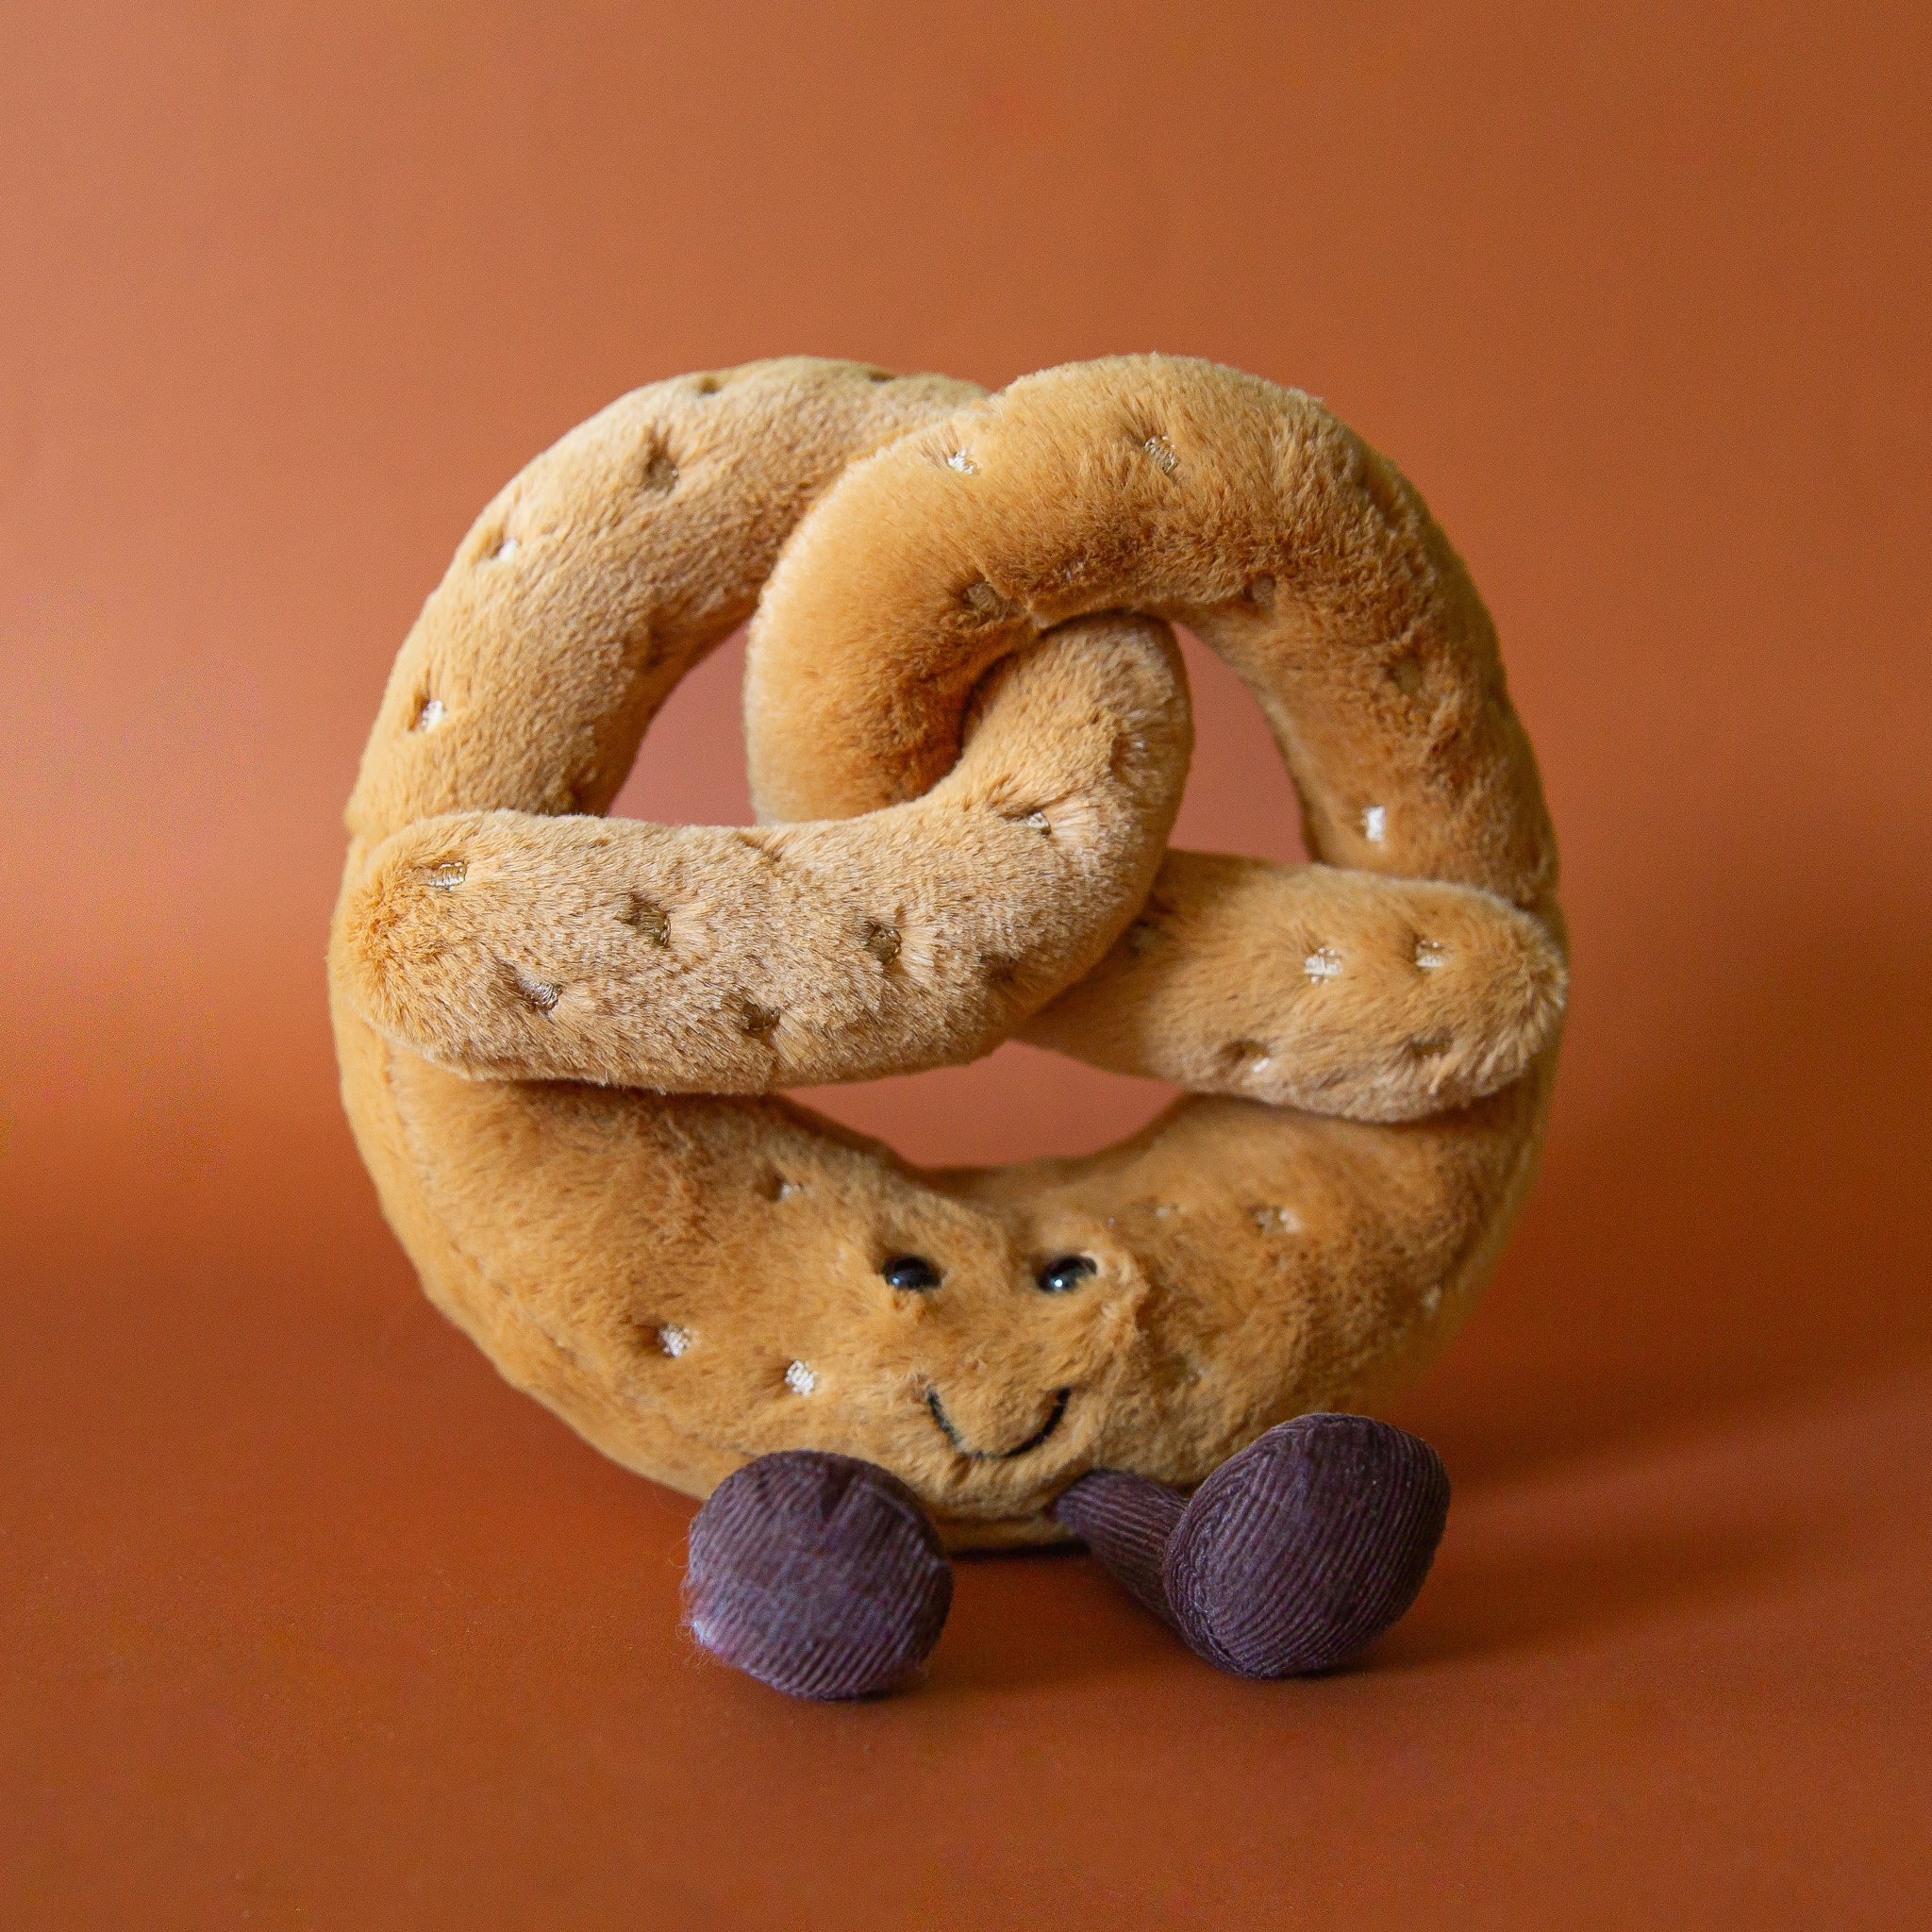 On a burnt orange background is a tan pretzel stuffed toy with a smiling expression. 